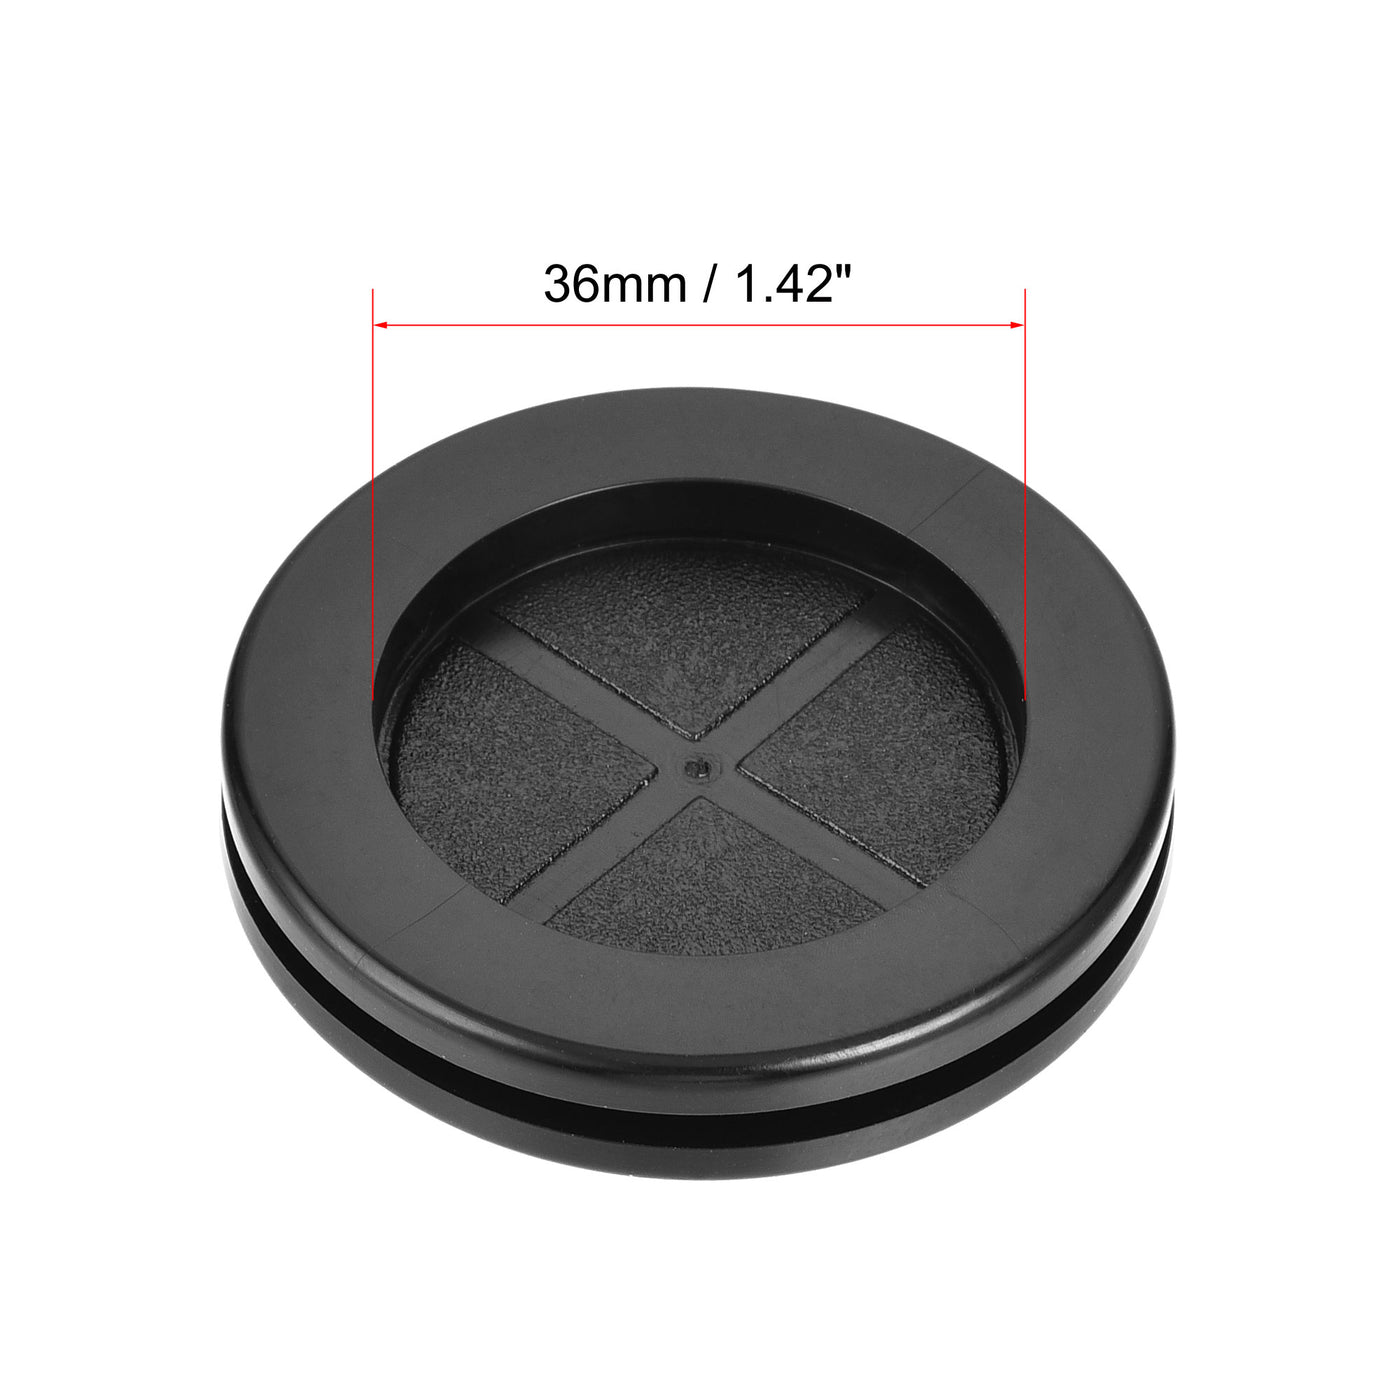 Uxcell Uxcell Rubber Grommet Round Double-Sided Mount Dia 22 mm for Wire Protection 4pcs